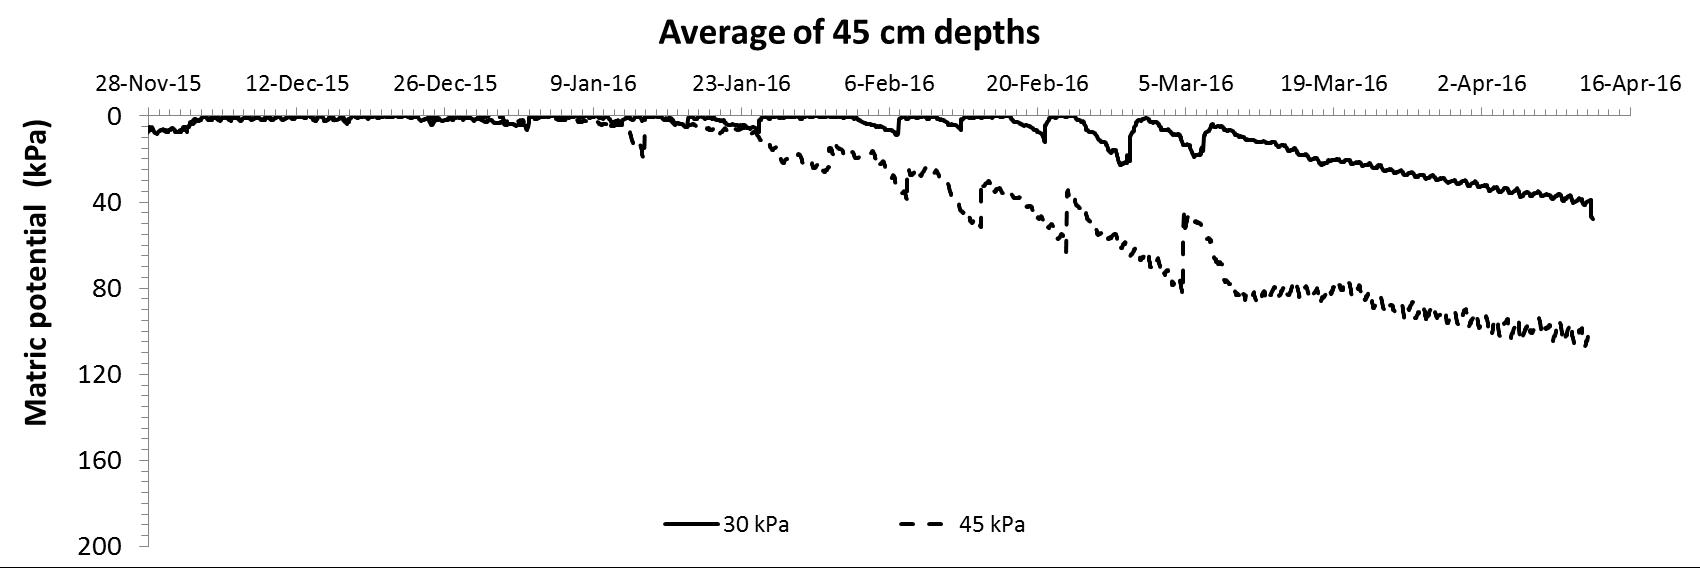 Figure 3: Average matric potential at 45cm depth for the two irrigation treatments. The reduced deficit (30kPa) irrigation treatment is the solid line and the standard irrigation deficit (45kPa) is the dashed line.